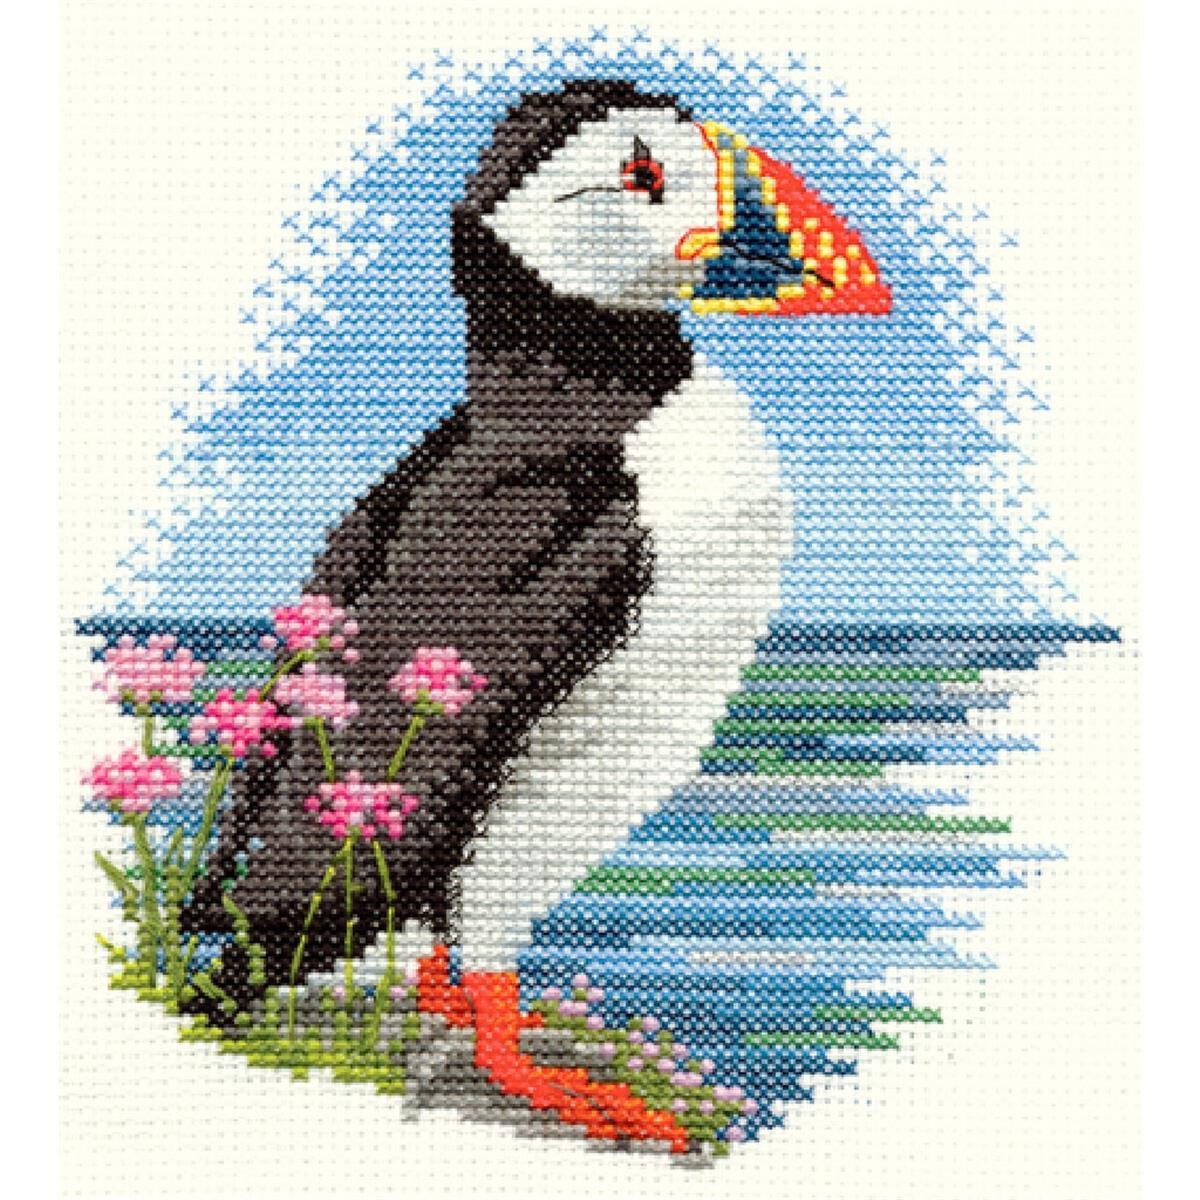 An embroidery pack from Bothy Threads featuring a puffin...